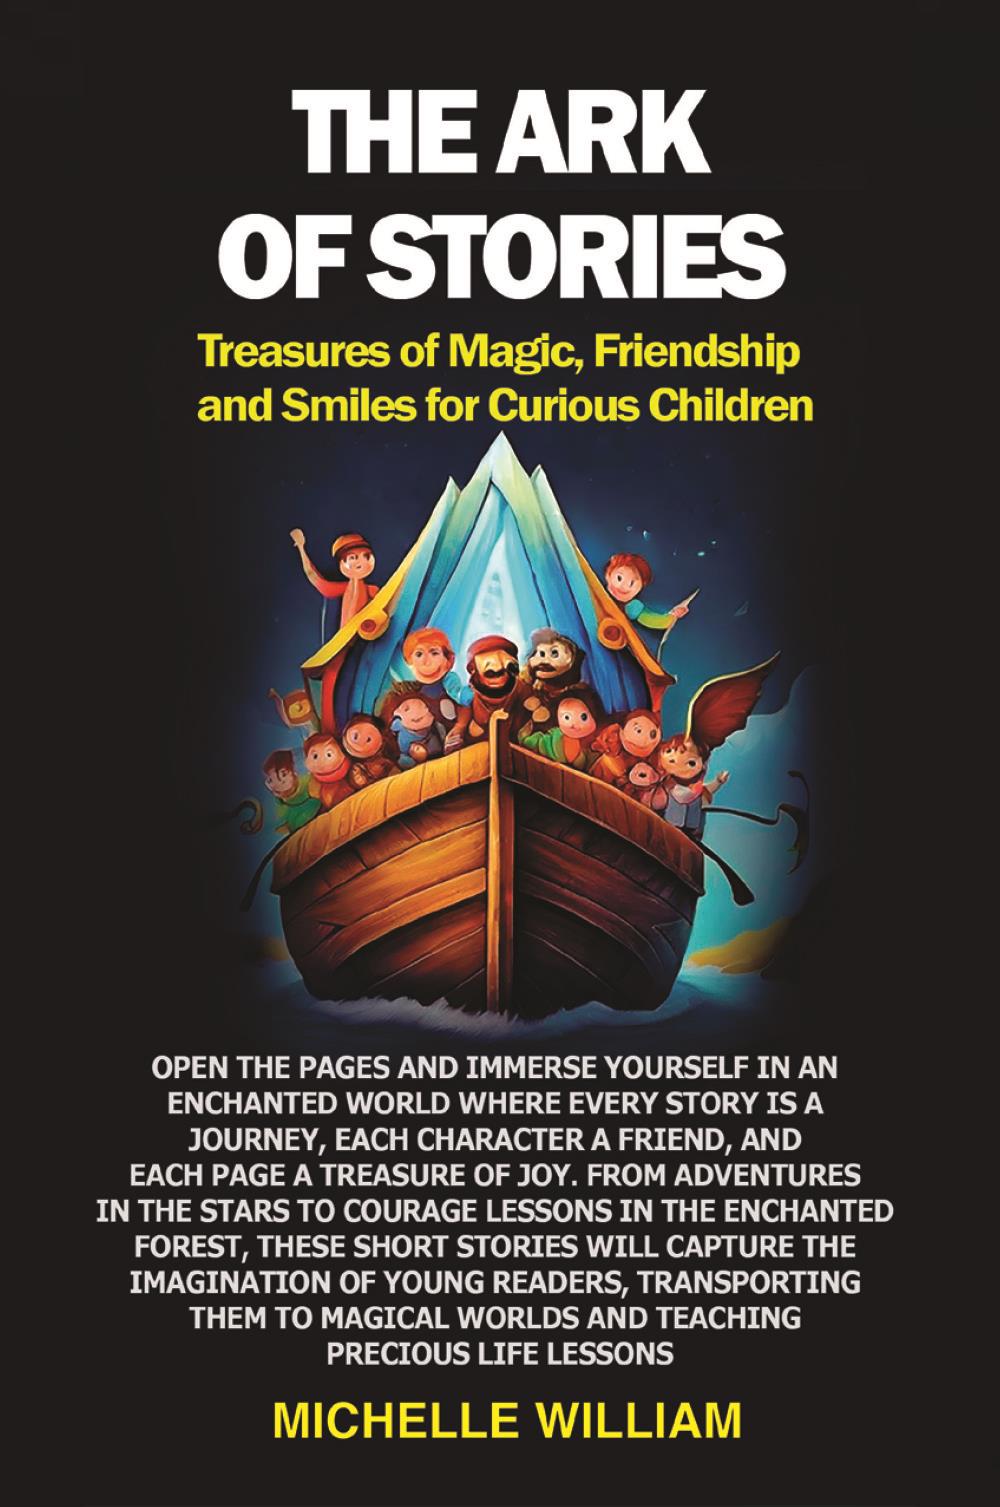 The Ark of Stories: Treasures of Magic, Friendship and Smiles for Curious Children